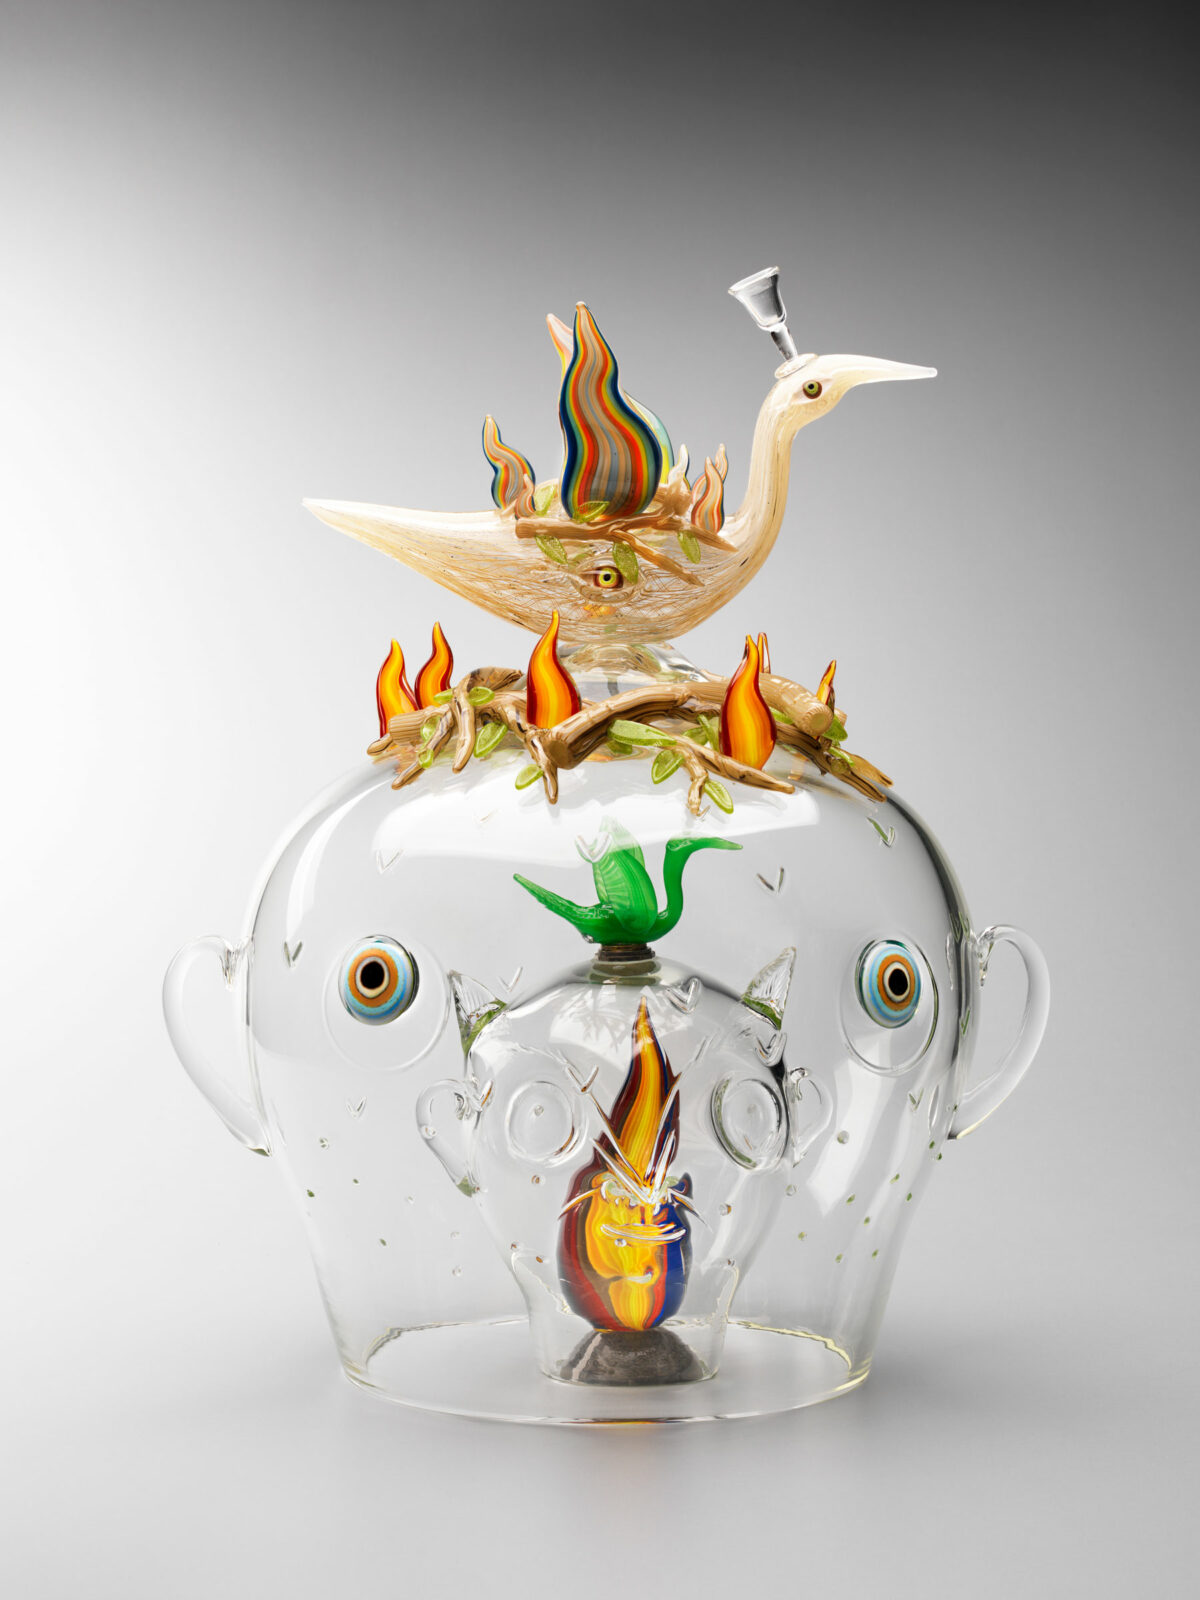 Fascinating Glass Sculptures Of Quirky Creatures And Objects By Tom Moore 2